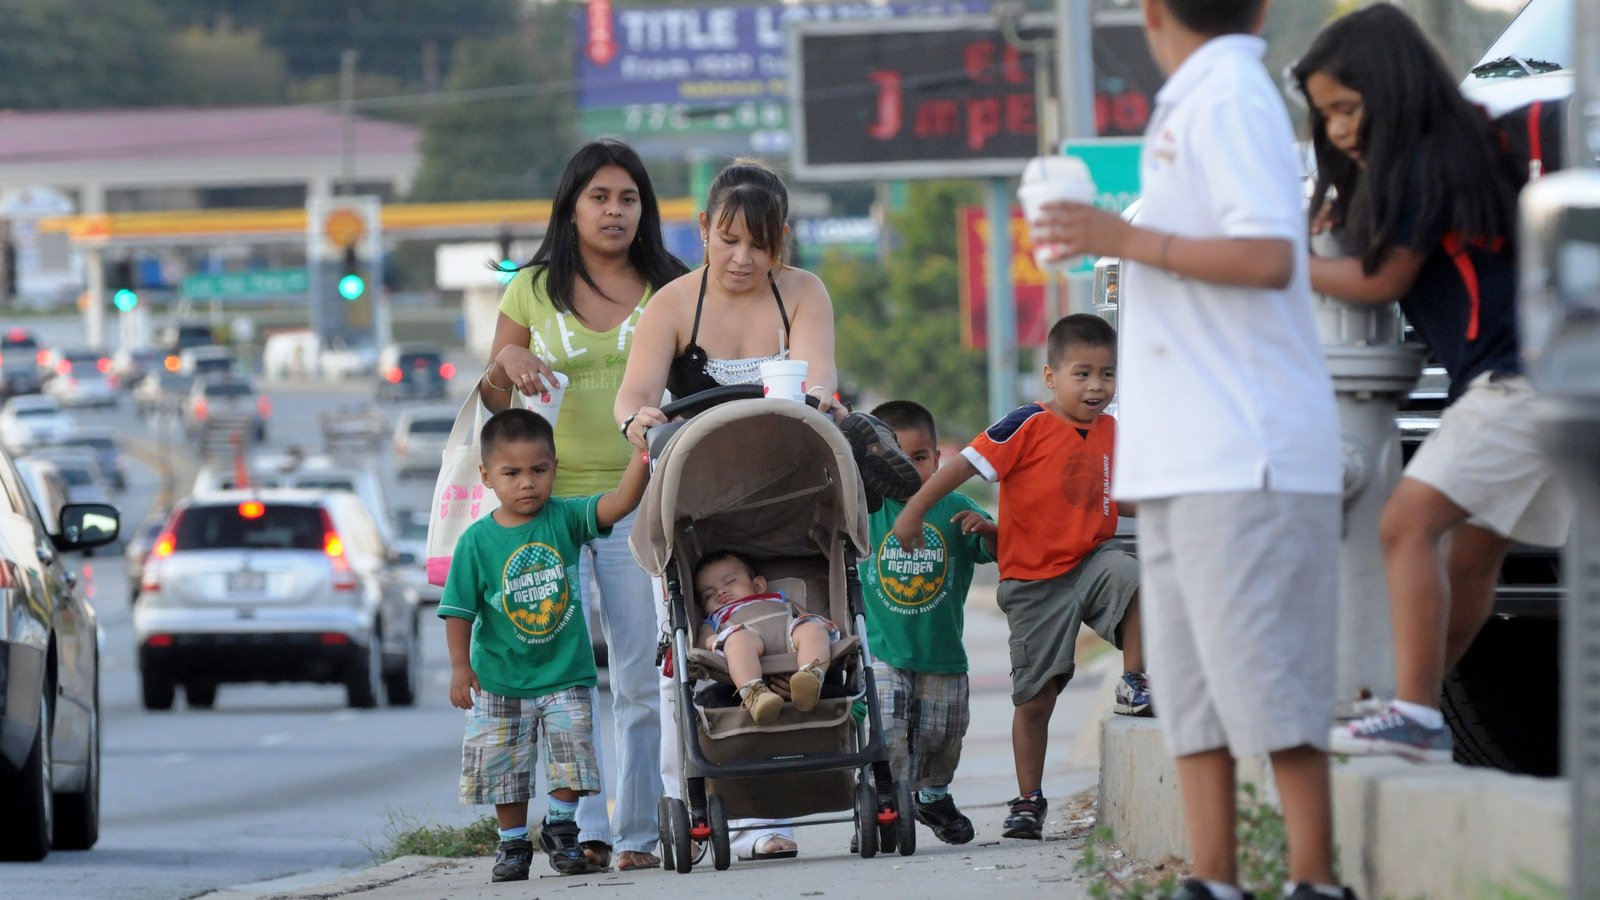 Undocumented immigrants from Mexico, walk with their children along Jimmy Carter Blvd. in Norcross, Ga. The two women walk great distances everyday as they would risk deportation if they drove a car without a driver’s license. (AP Photo/Erik S. Lesser)